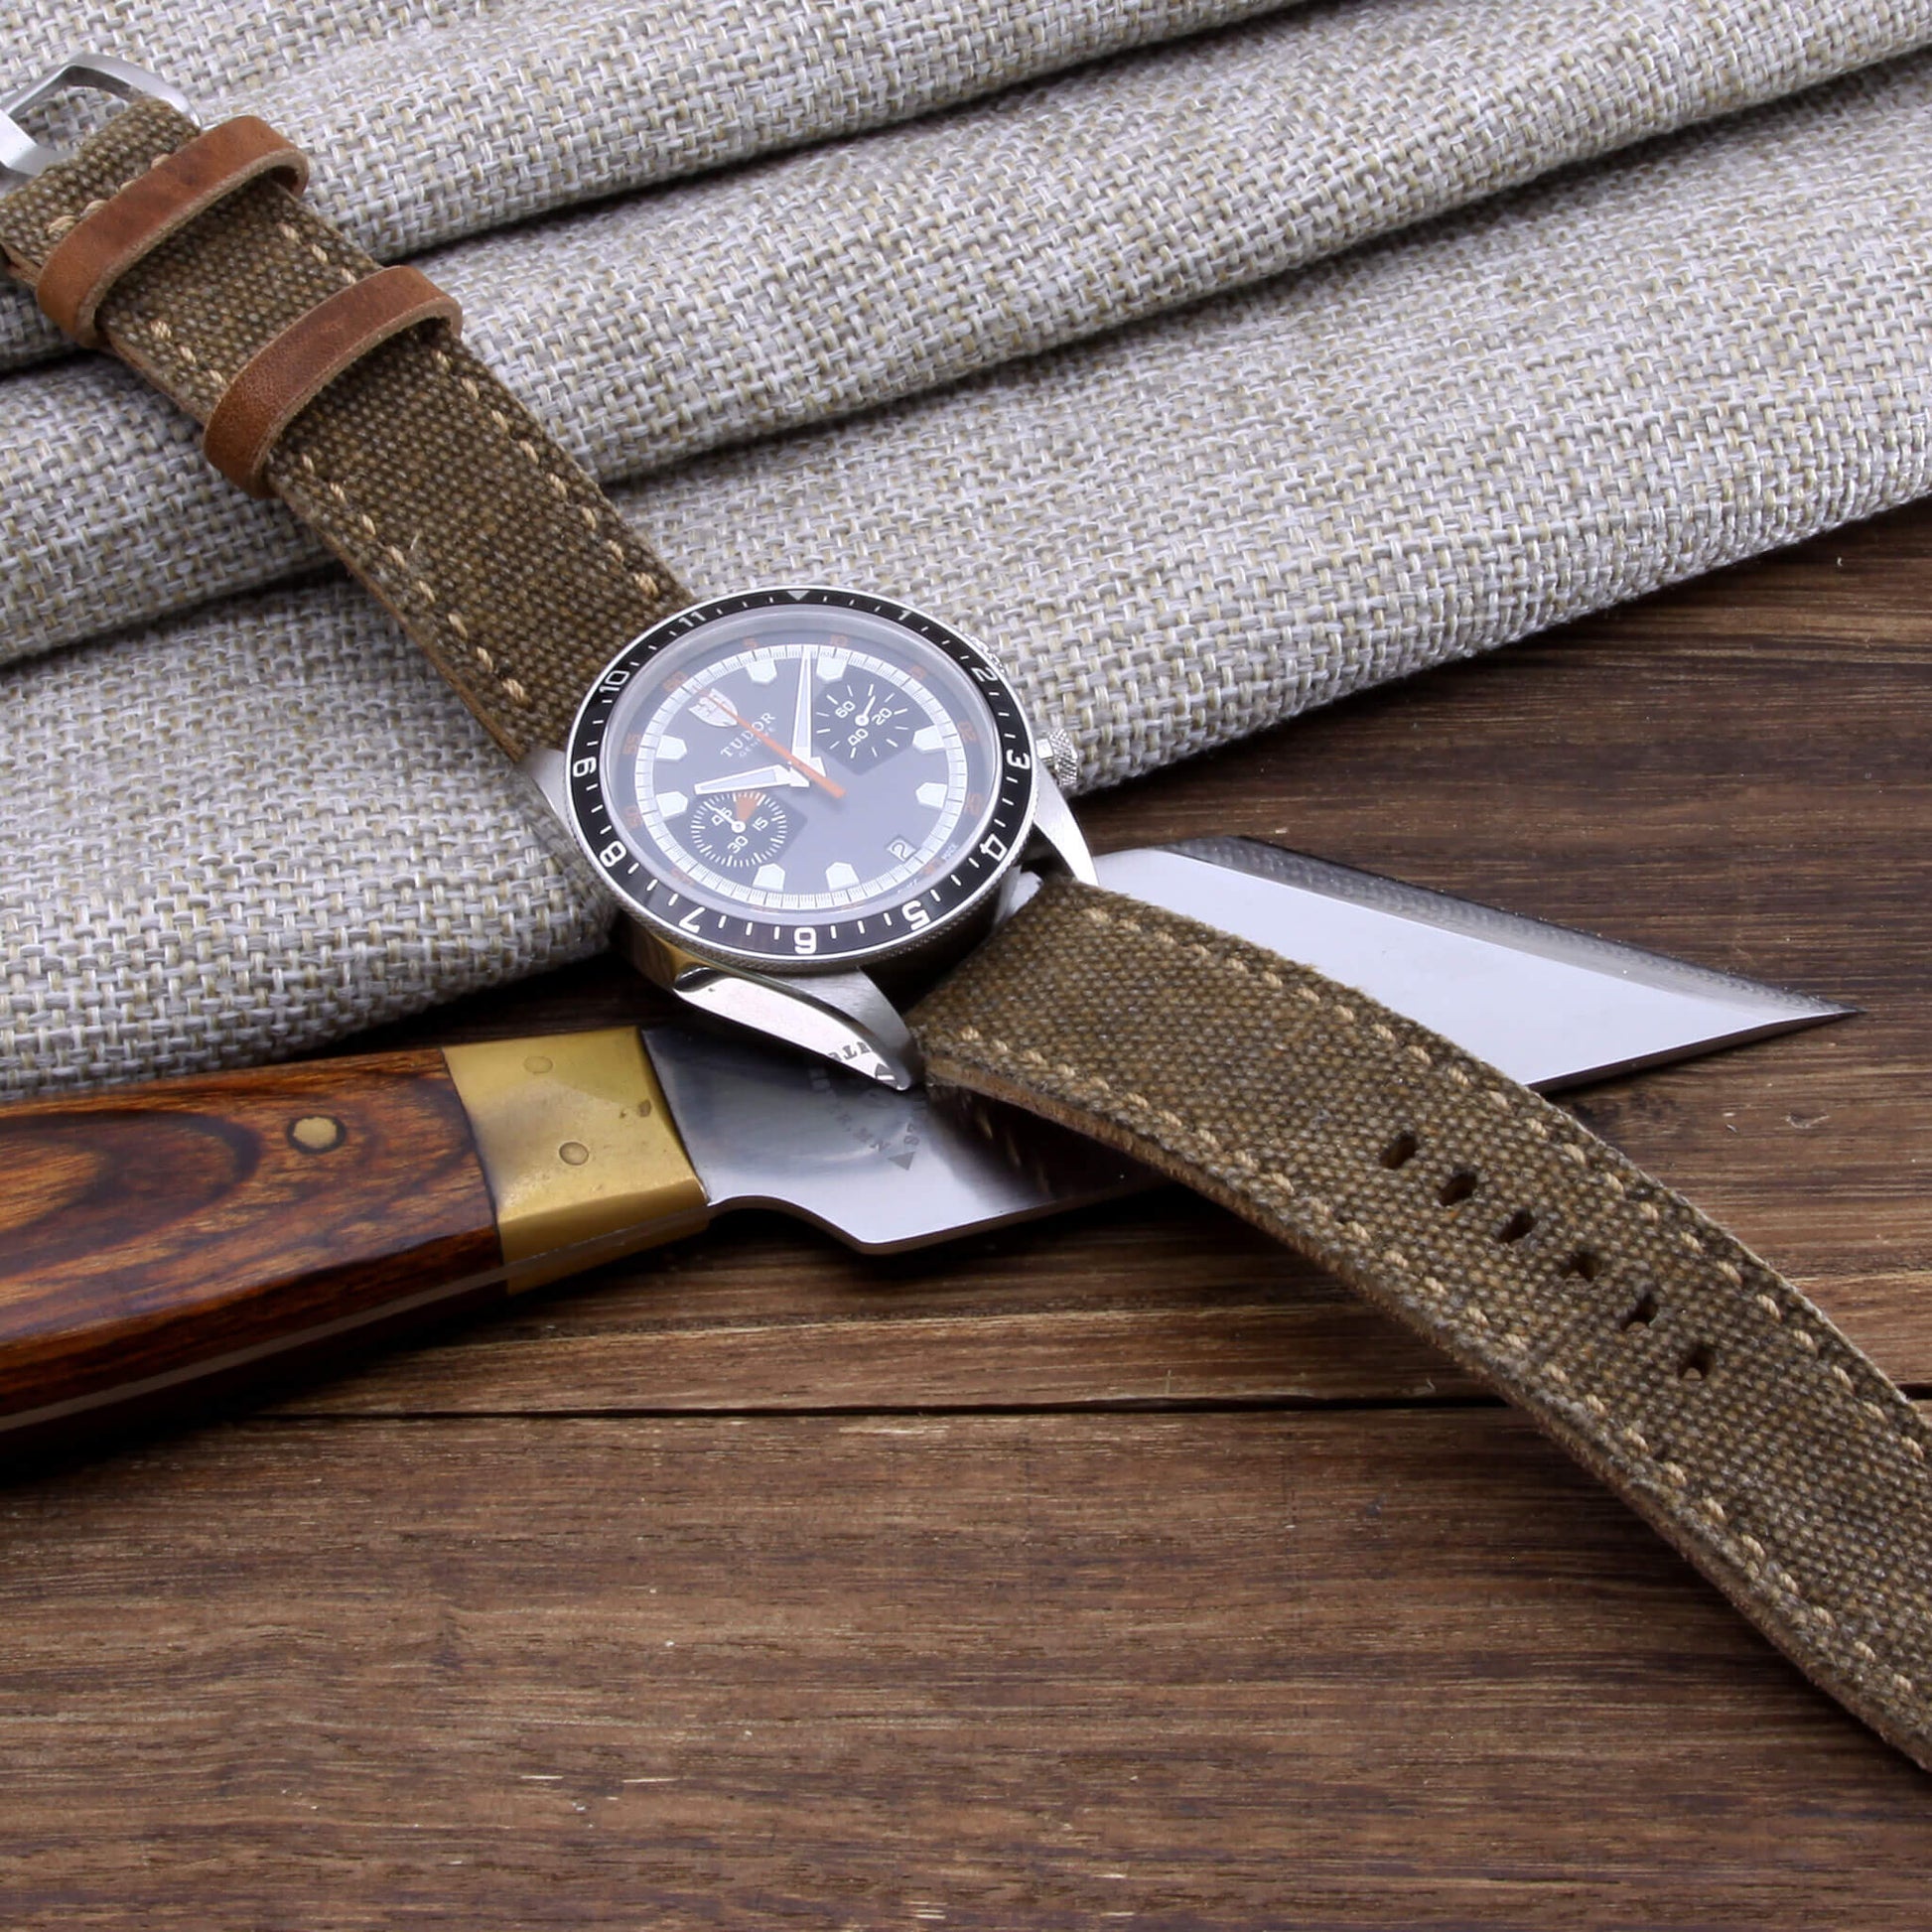 5th View of 2-Piece Full Stitch Leather Watch Strap, made with Rustic Brown Canvas and Italian veg-tanned leather lining, handcrafted by Cozy Handmade